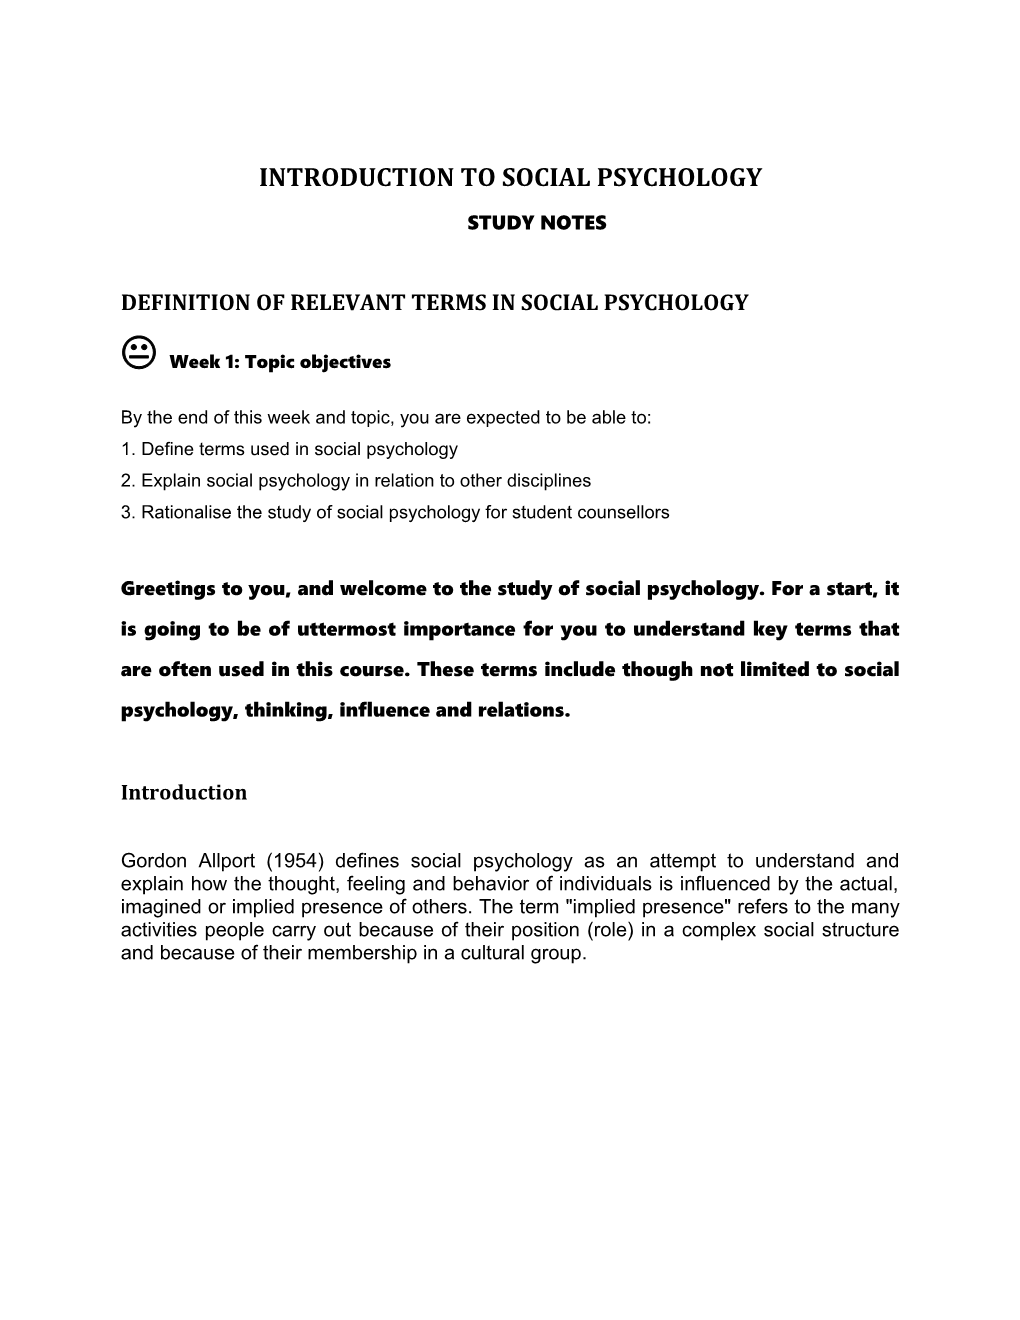 Definition of Relevant Terms in Social Psychology